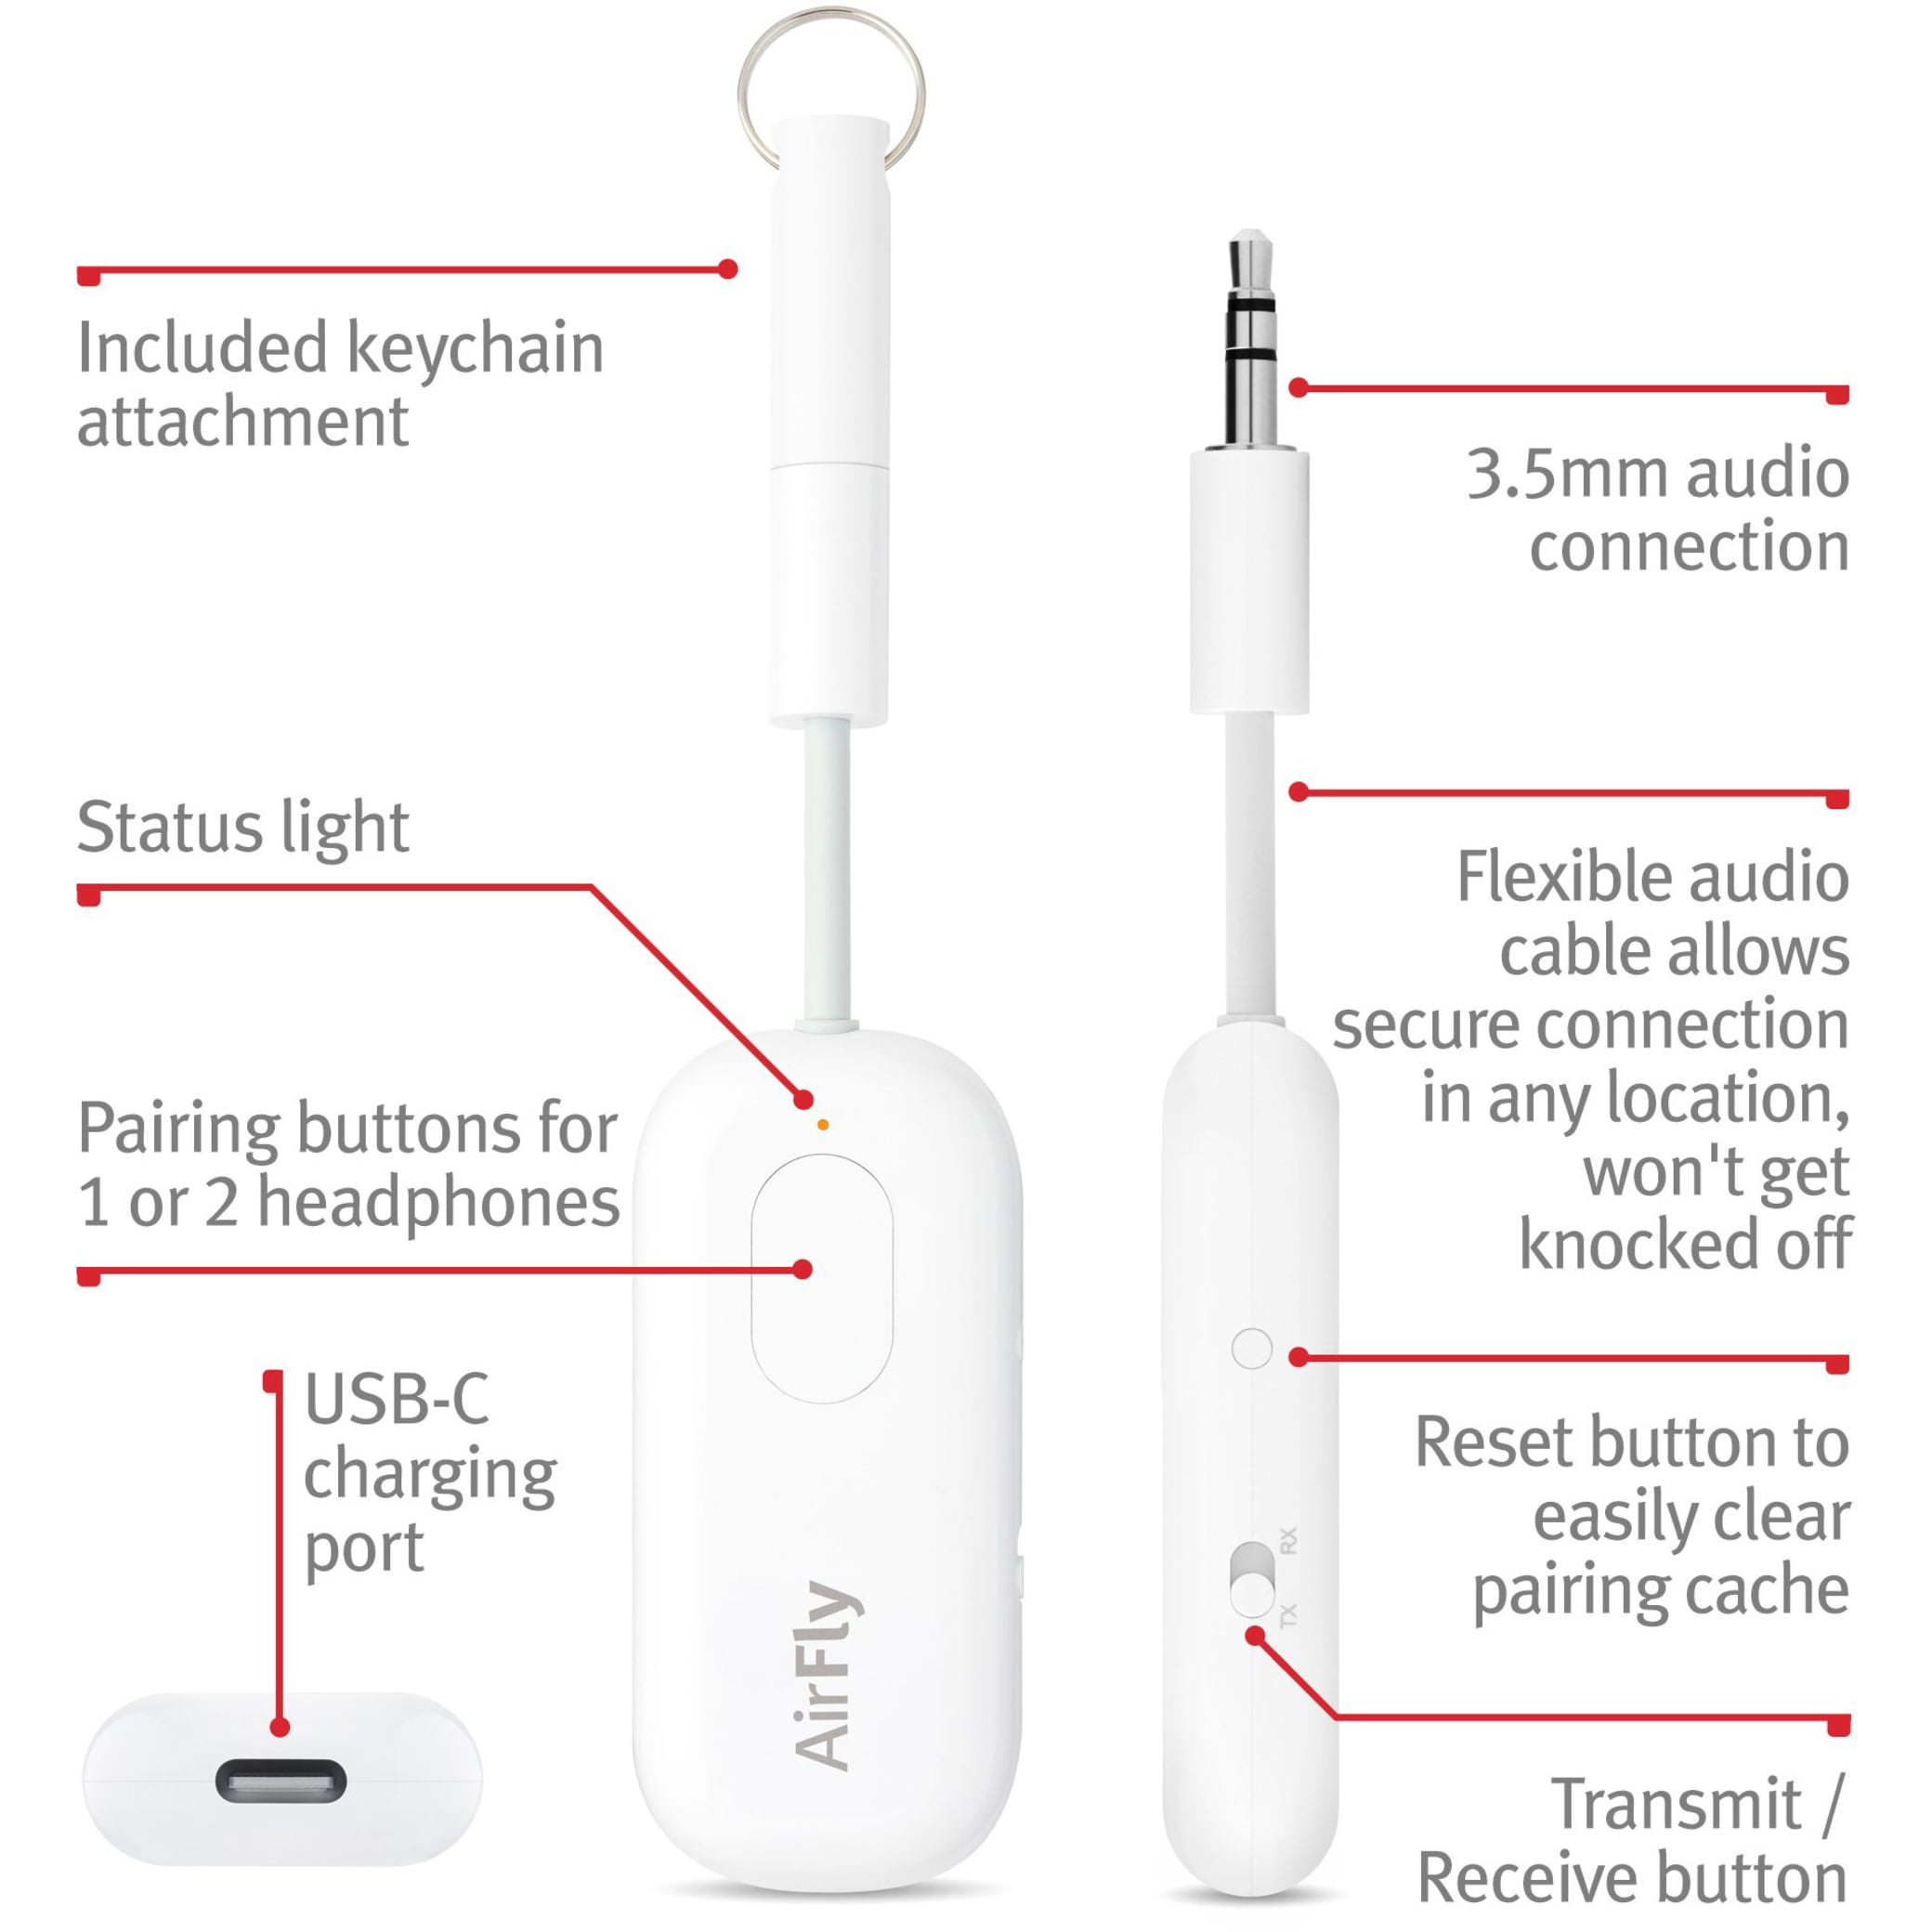 Latter rutine Whirlpool Twelve South AirFly Pro | Wireless Transmitter/Receiver with Audio Sharing  for up to 2 AirPods/Wireless Headphones to Any Audio Jack for use on  Airplanes, Boats or in Gym, Home, auto - Walmart.com